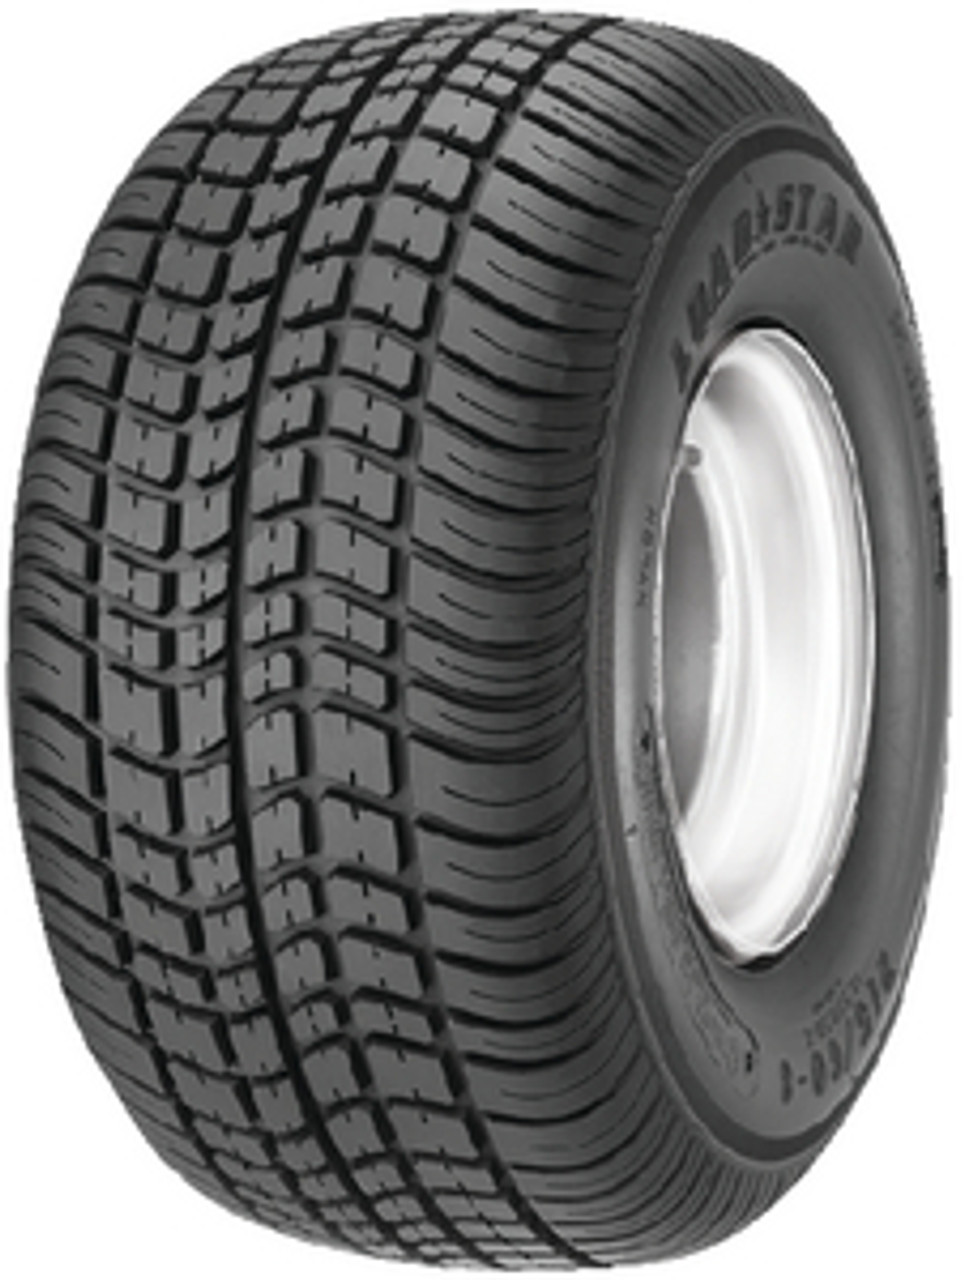 LOADSTAR - 10" WIDE PROFILE TIRE AND WHEEL ASSEMBLY - Tire: 205/65-10 K399 BIAS Bolt Pattern: 5 on 4Â½" Wheel: 10 x 6 Solid Finish: White Load Range: E Ply: 10 Max Load: 1650 lbs.